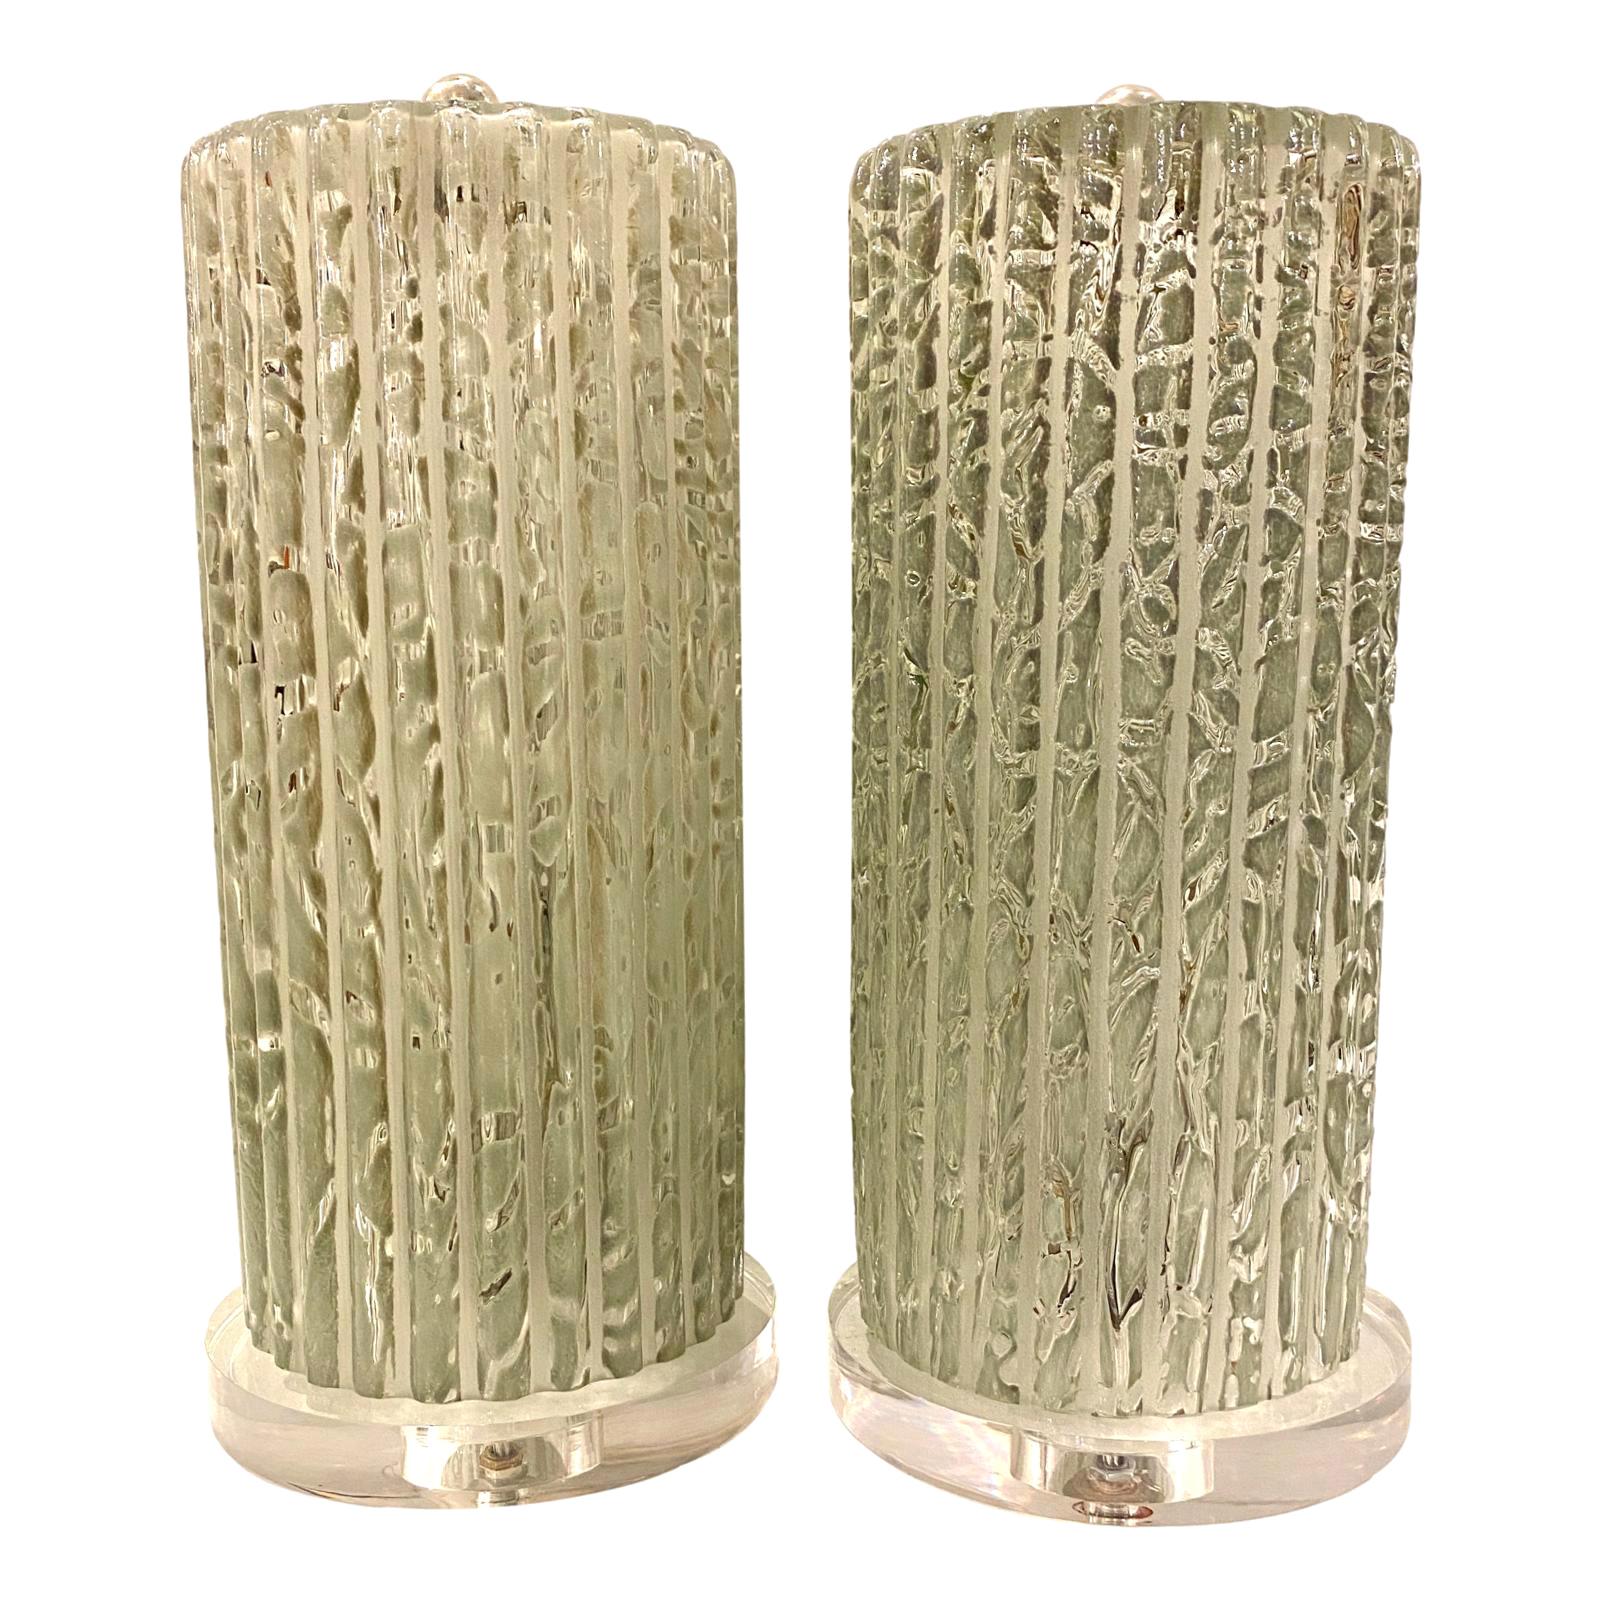 Pair of Midcentury Italian Glass Table Lamps